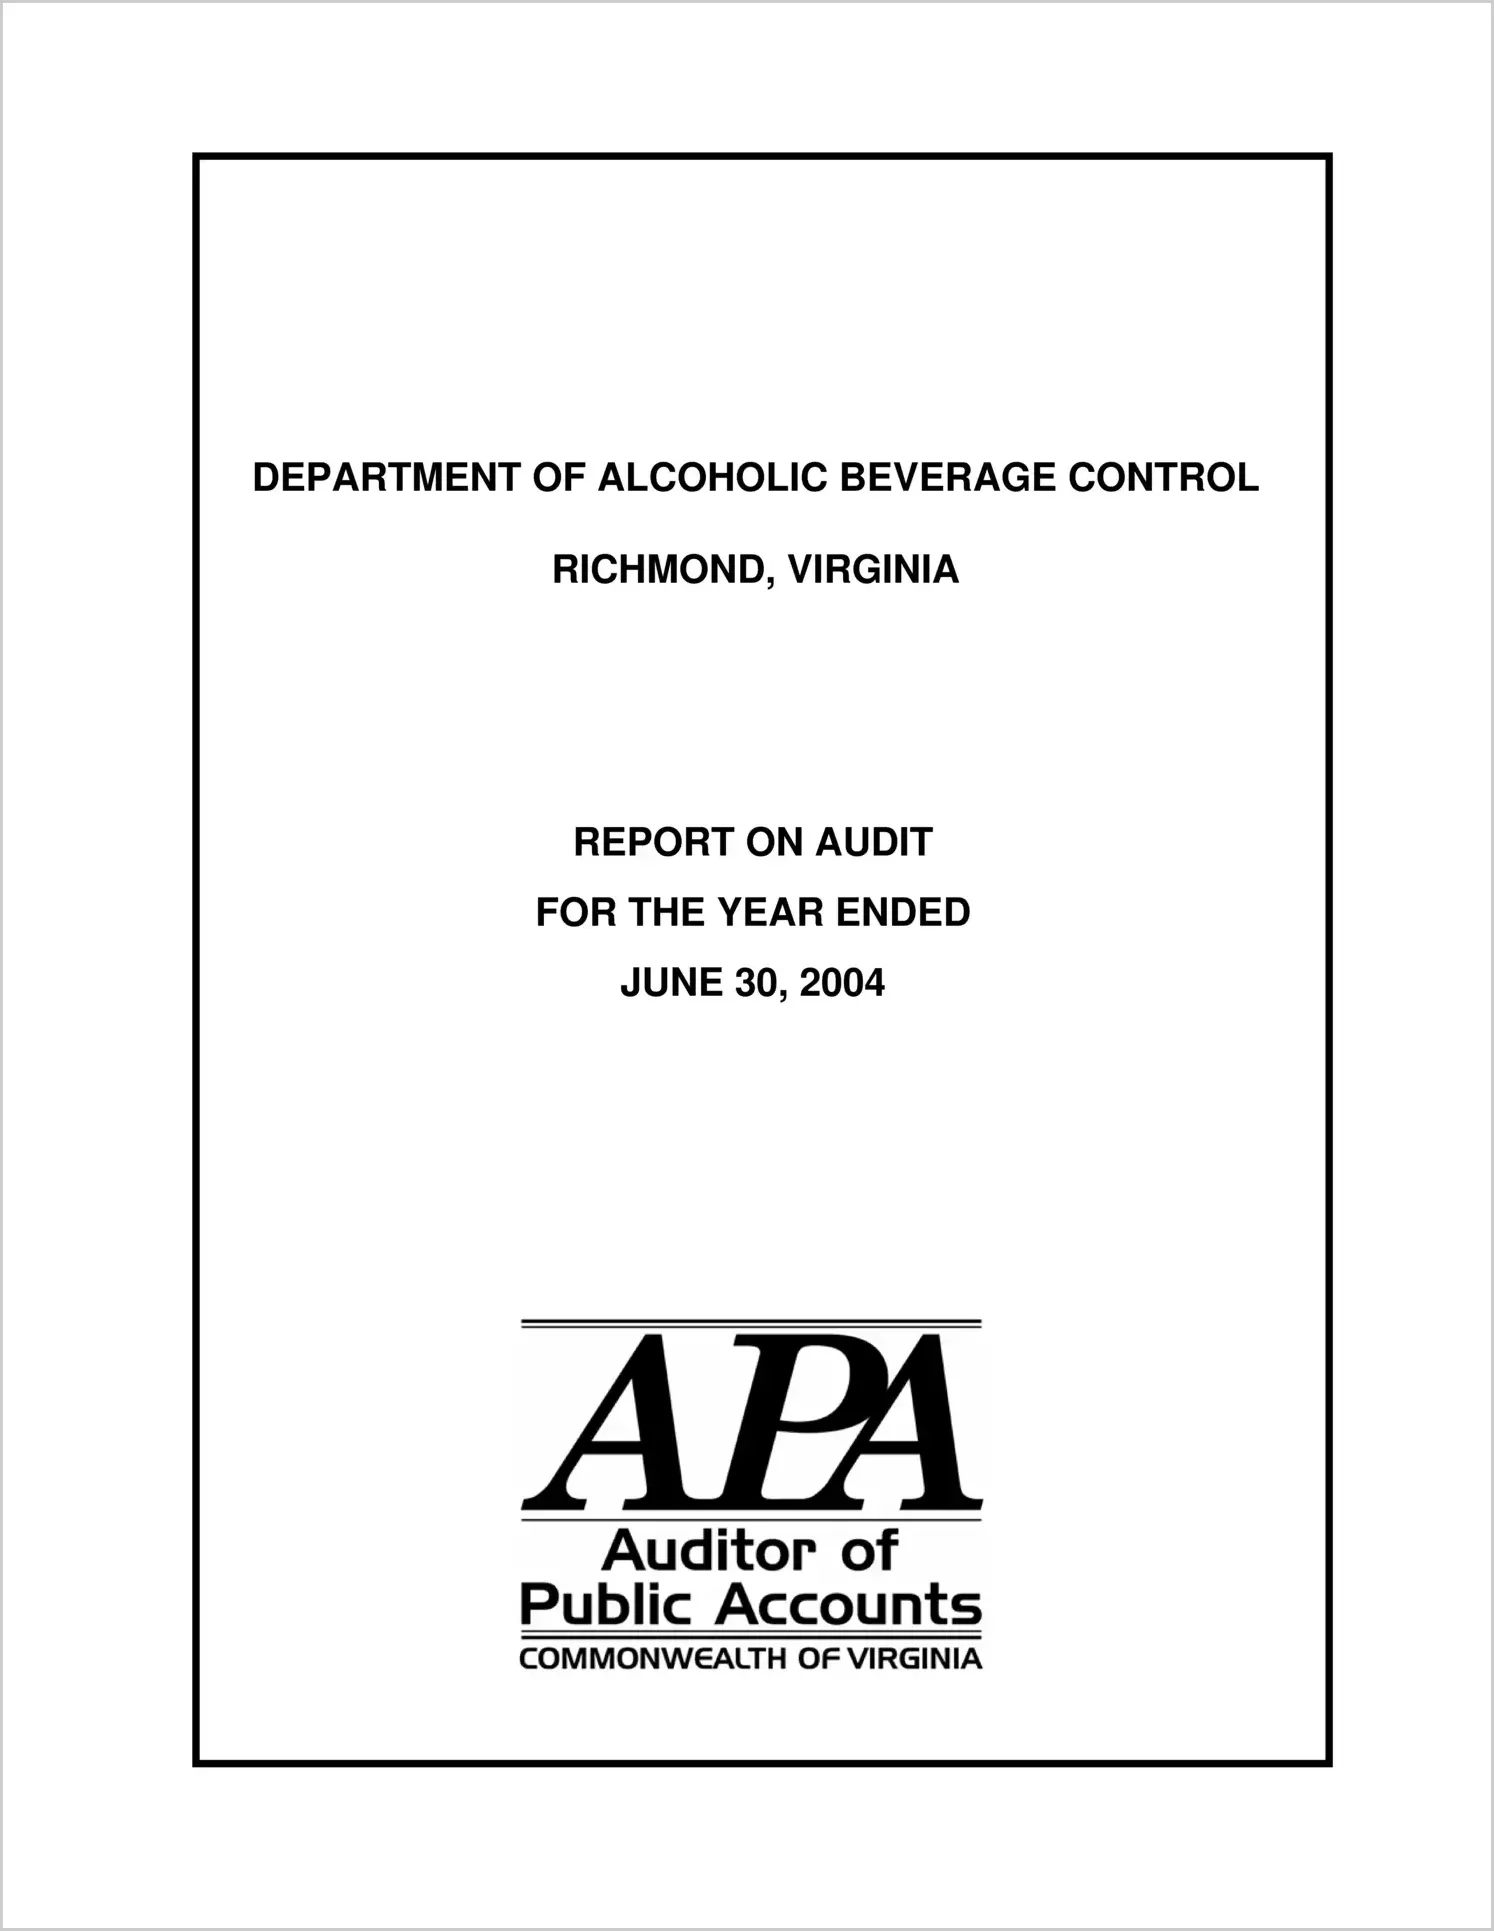 Department of Alcoholic Beverage Control for the year ended June 30, 2004